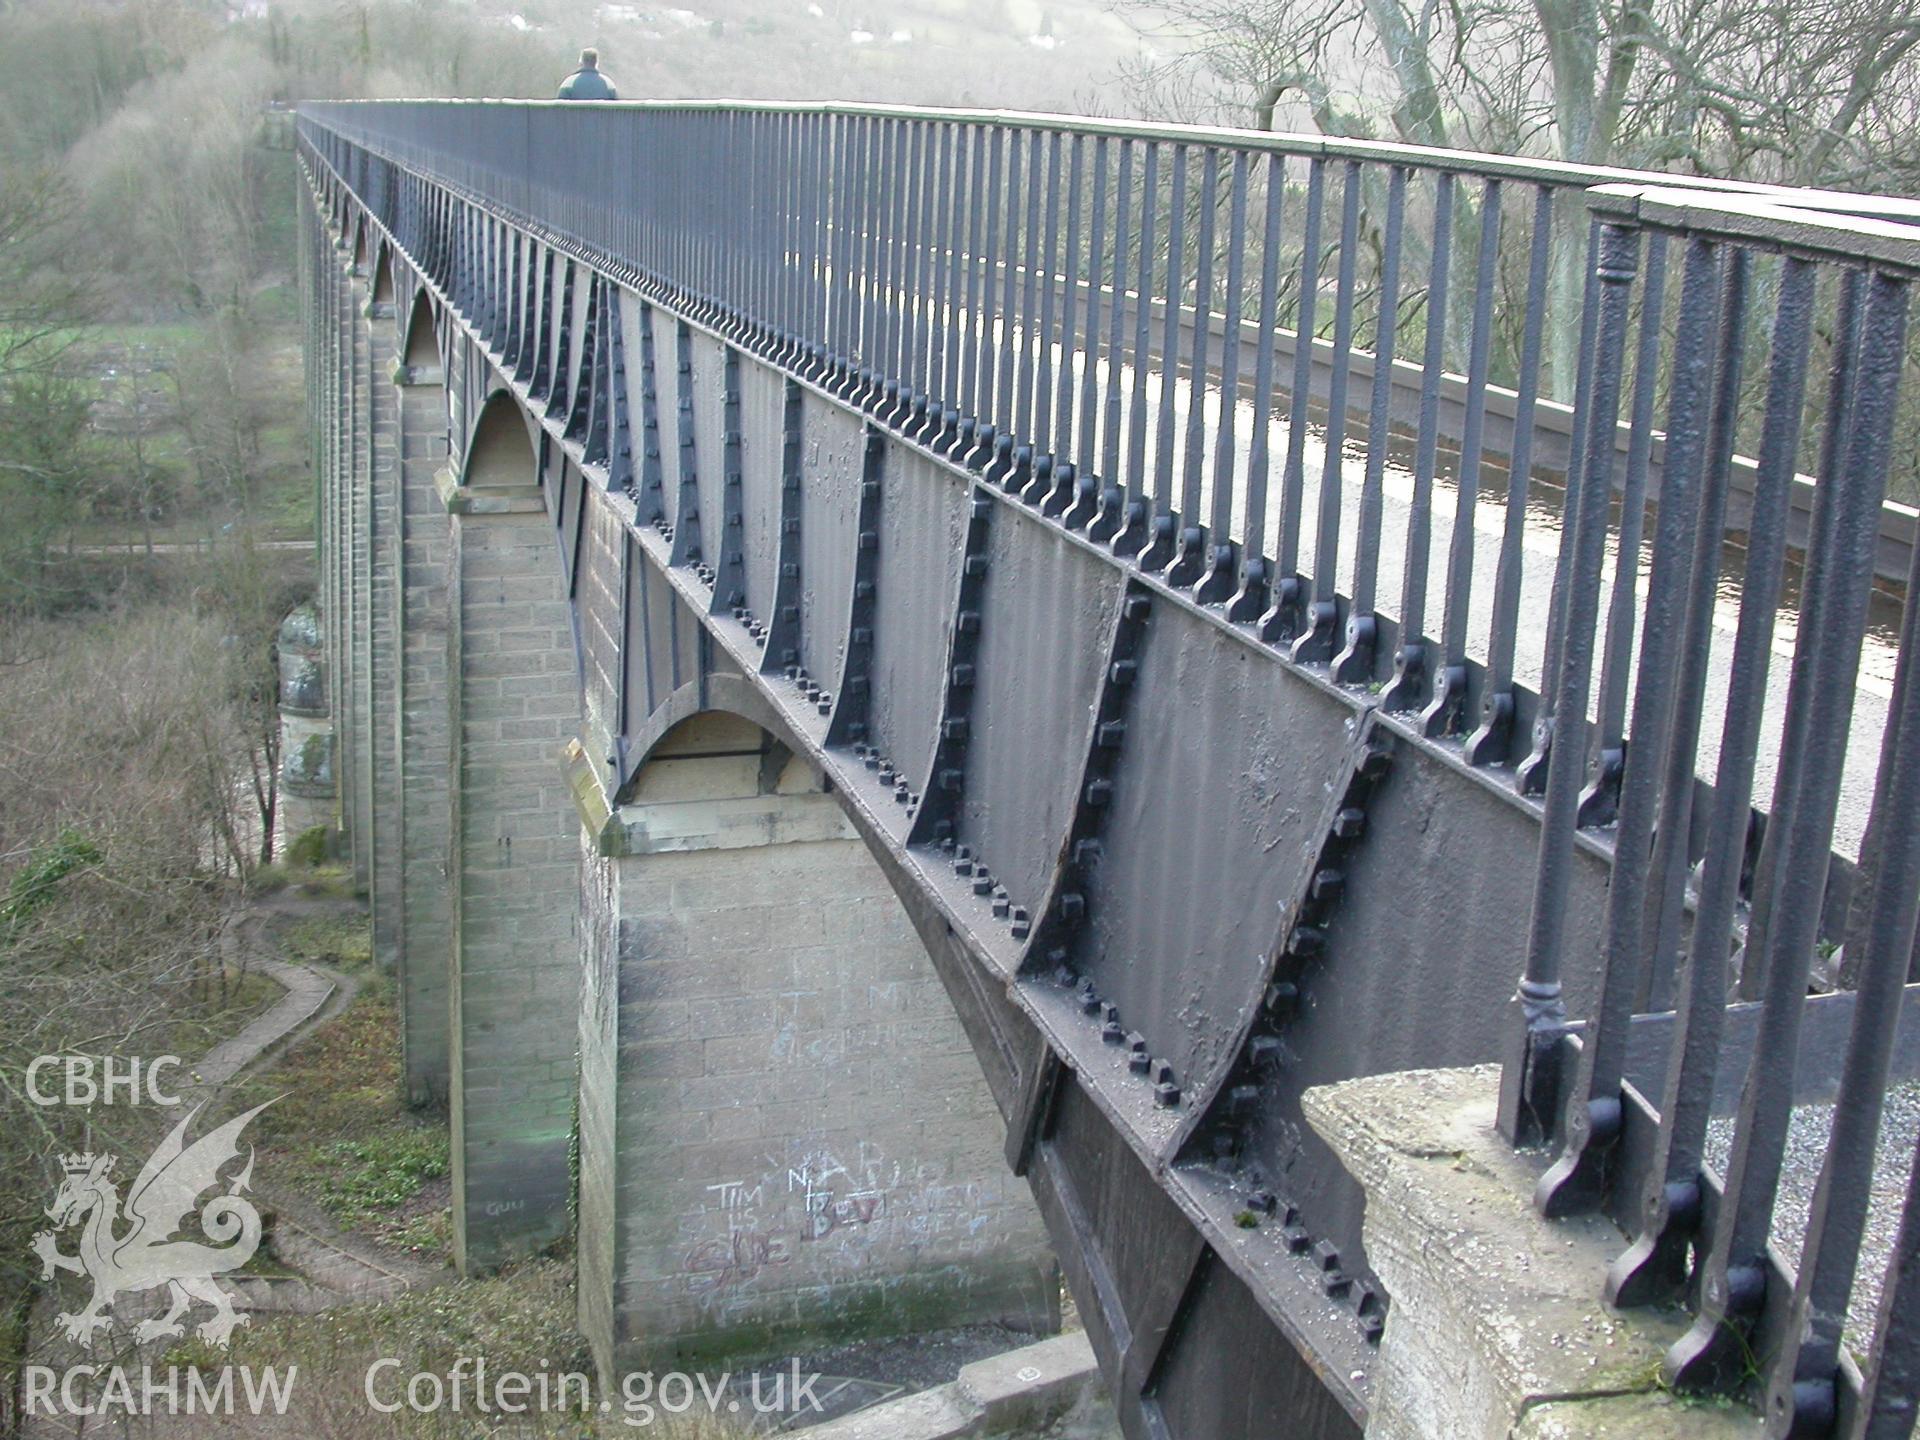 Cast-iron aqueduct spans and deck from the north-east.